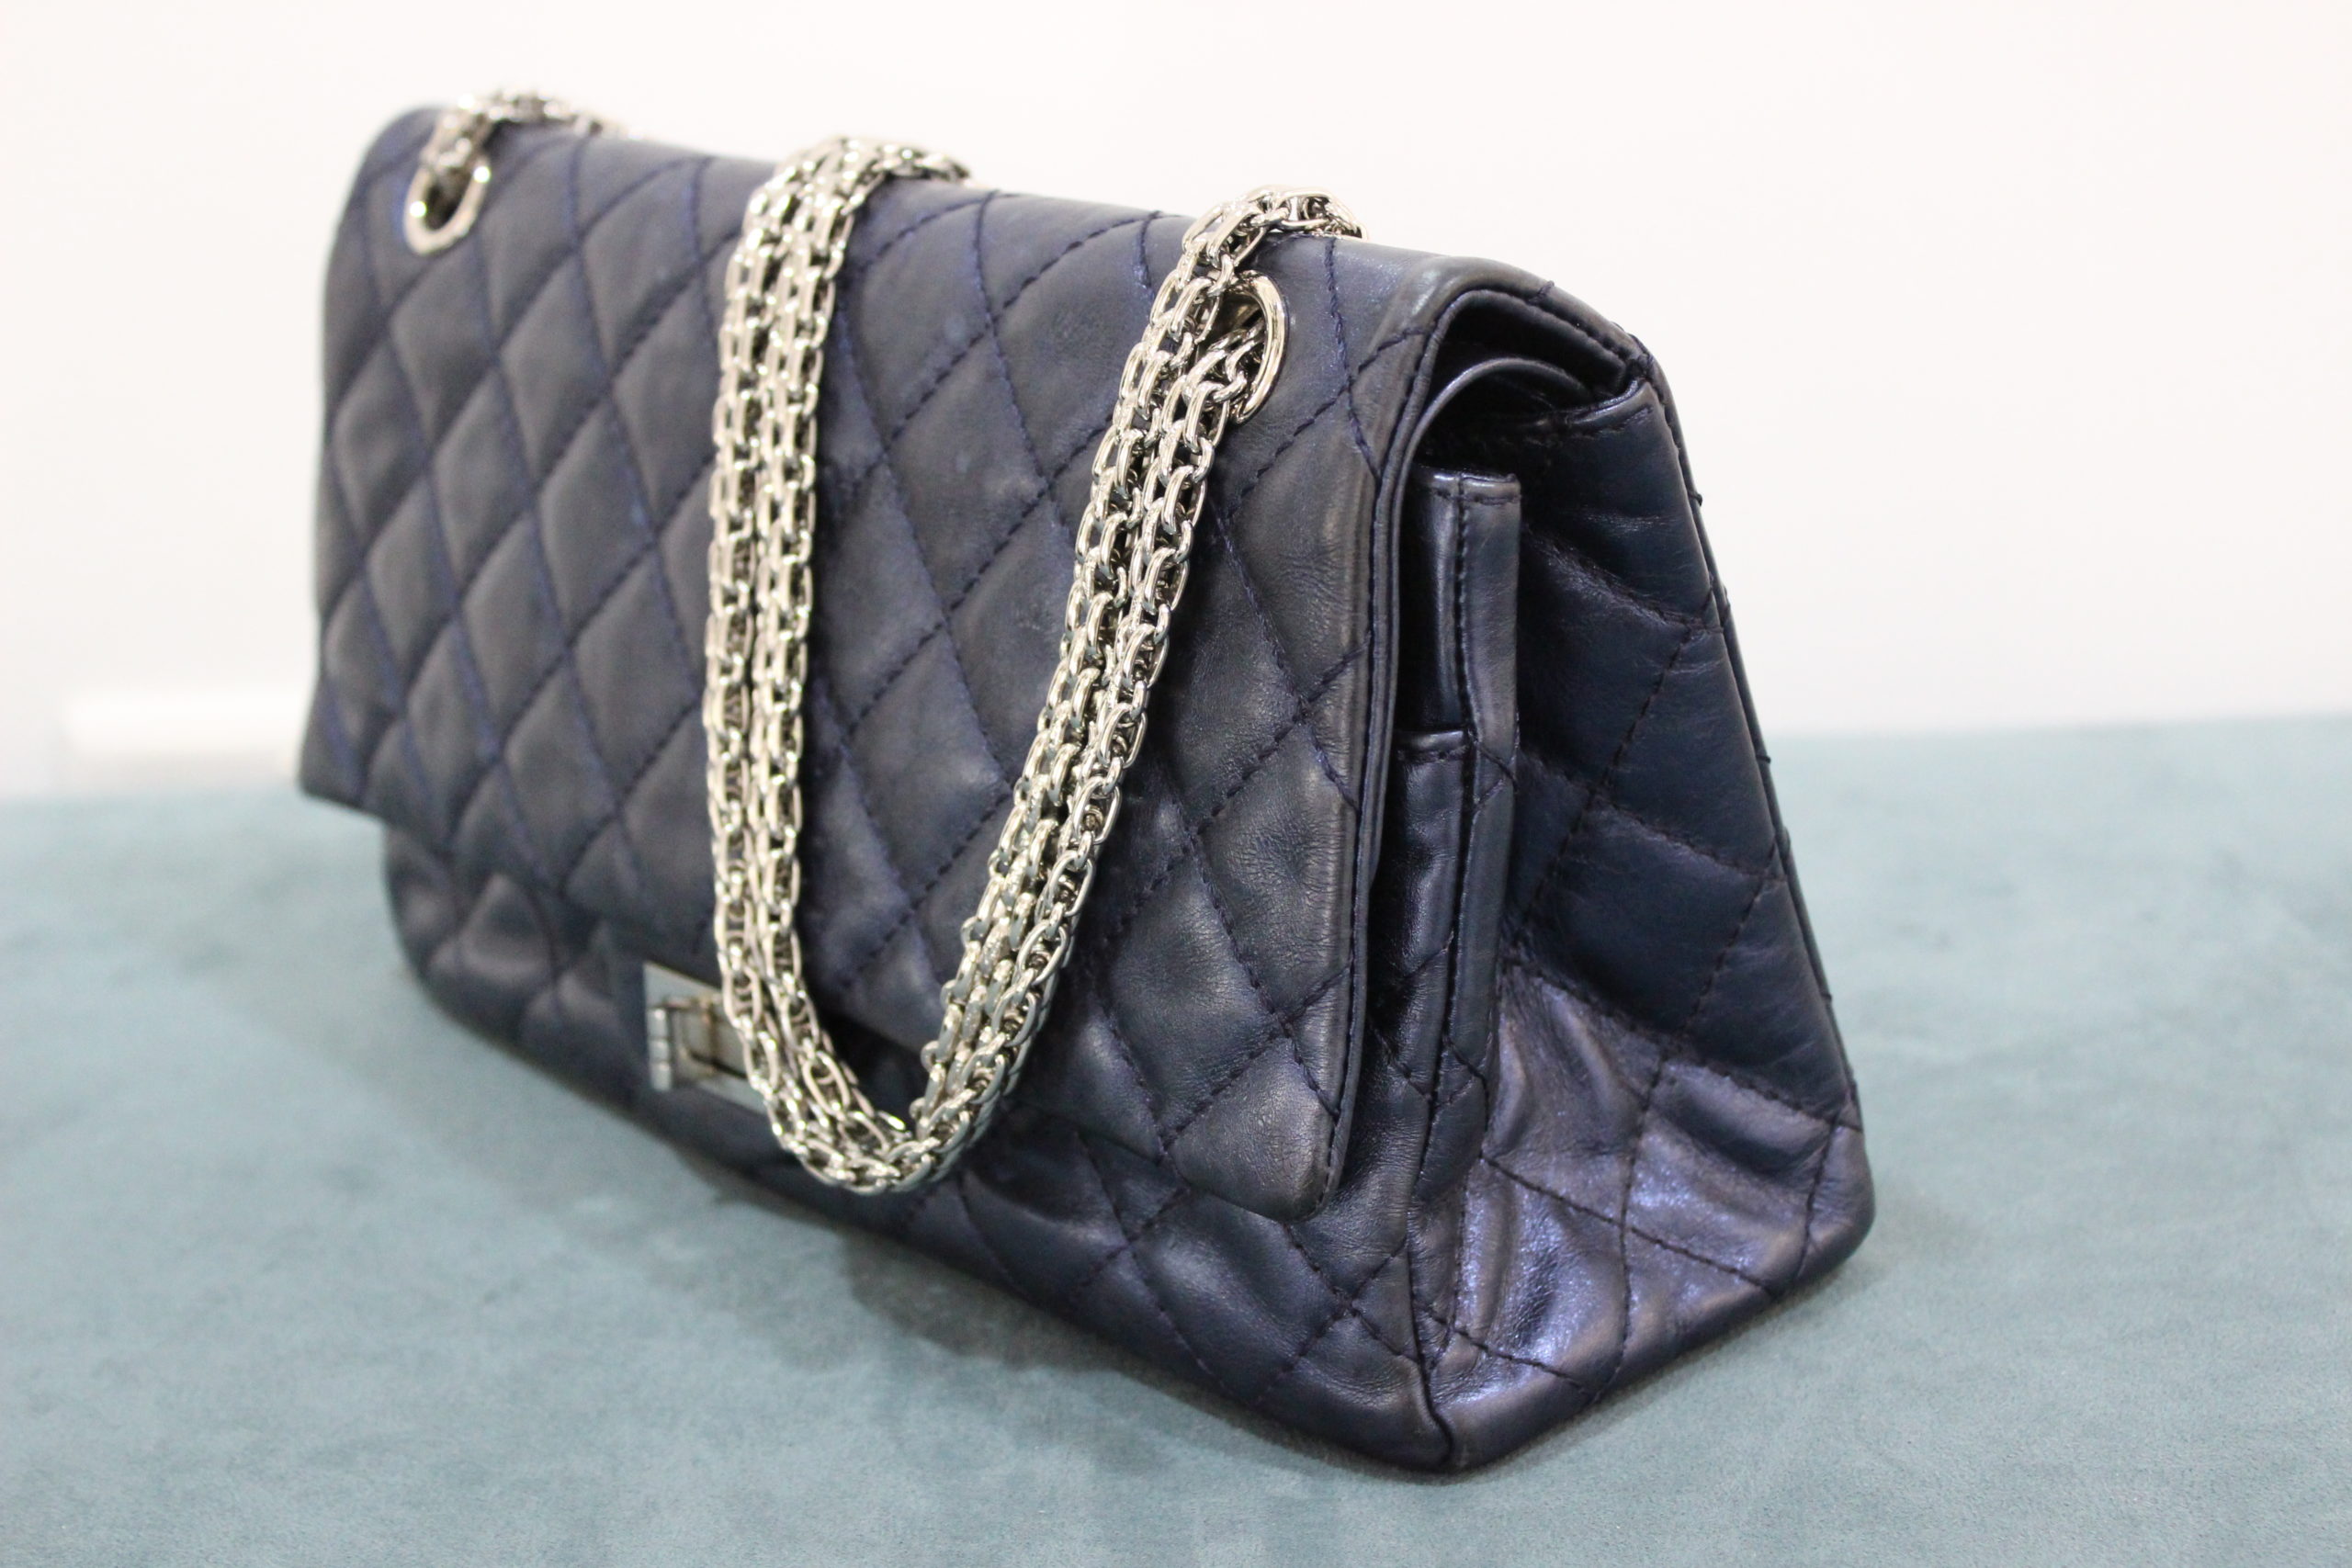 A Chanel quilted bright blue leather re-issue flap bag, …